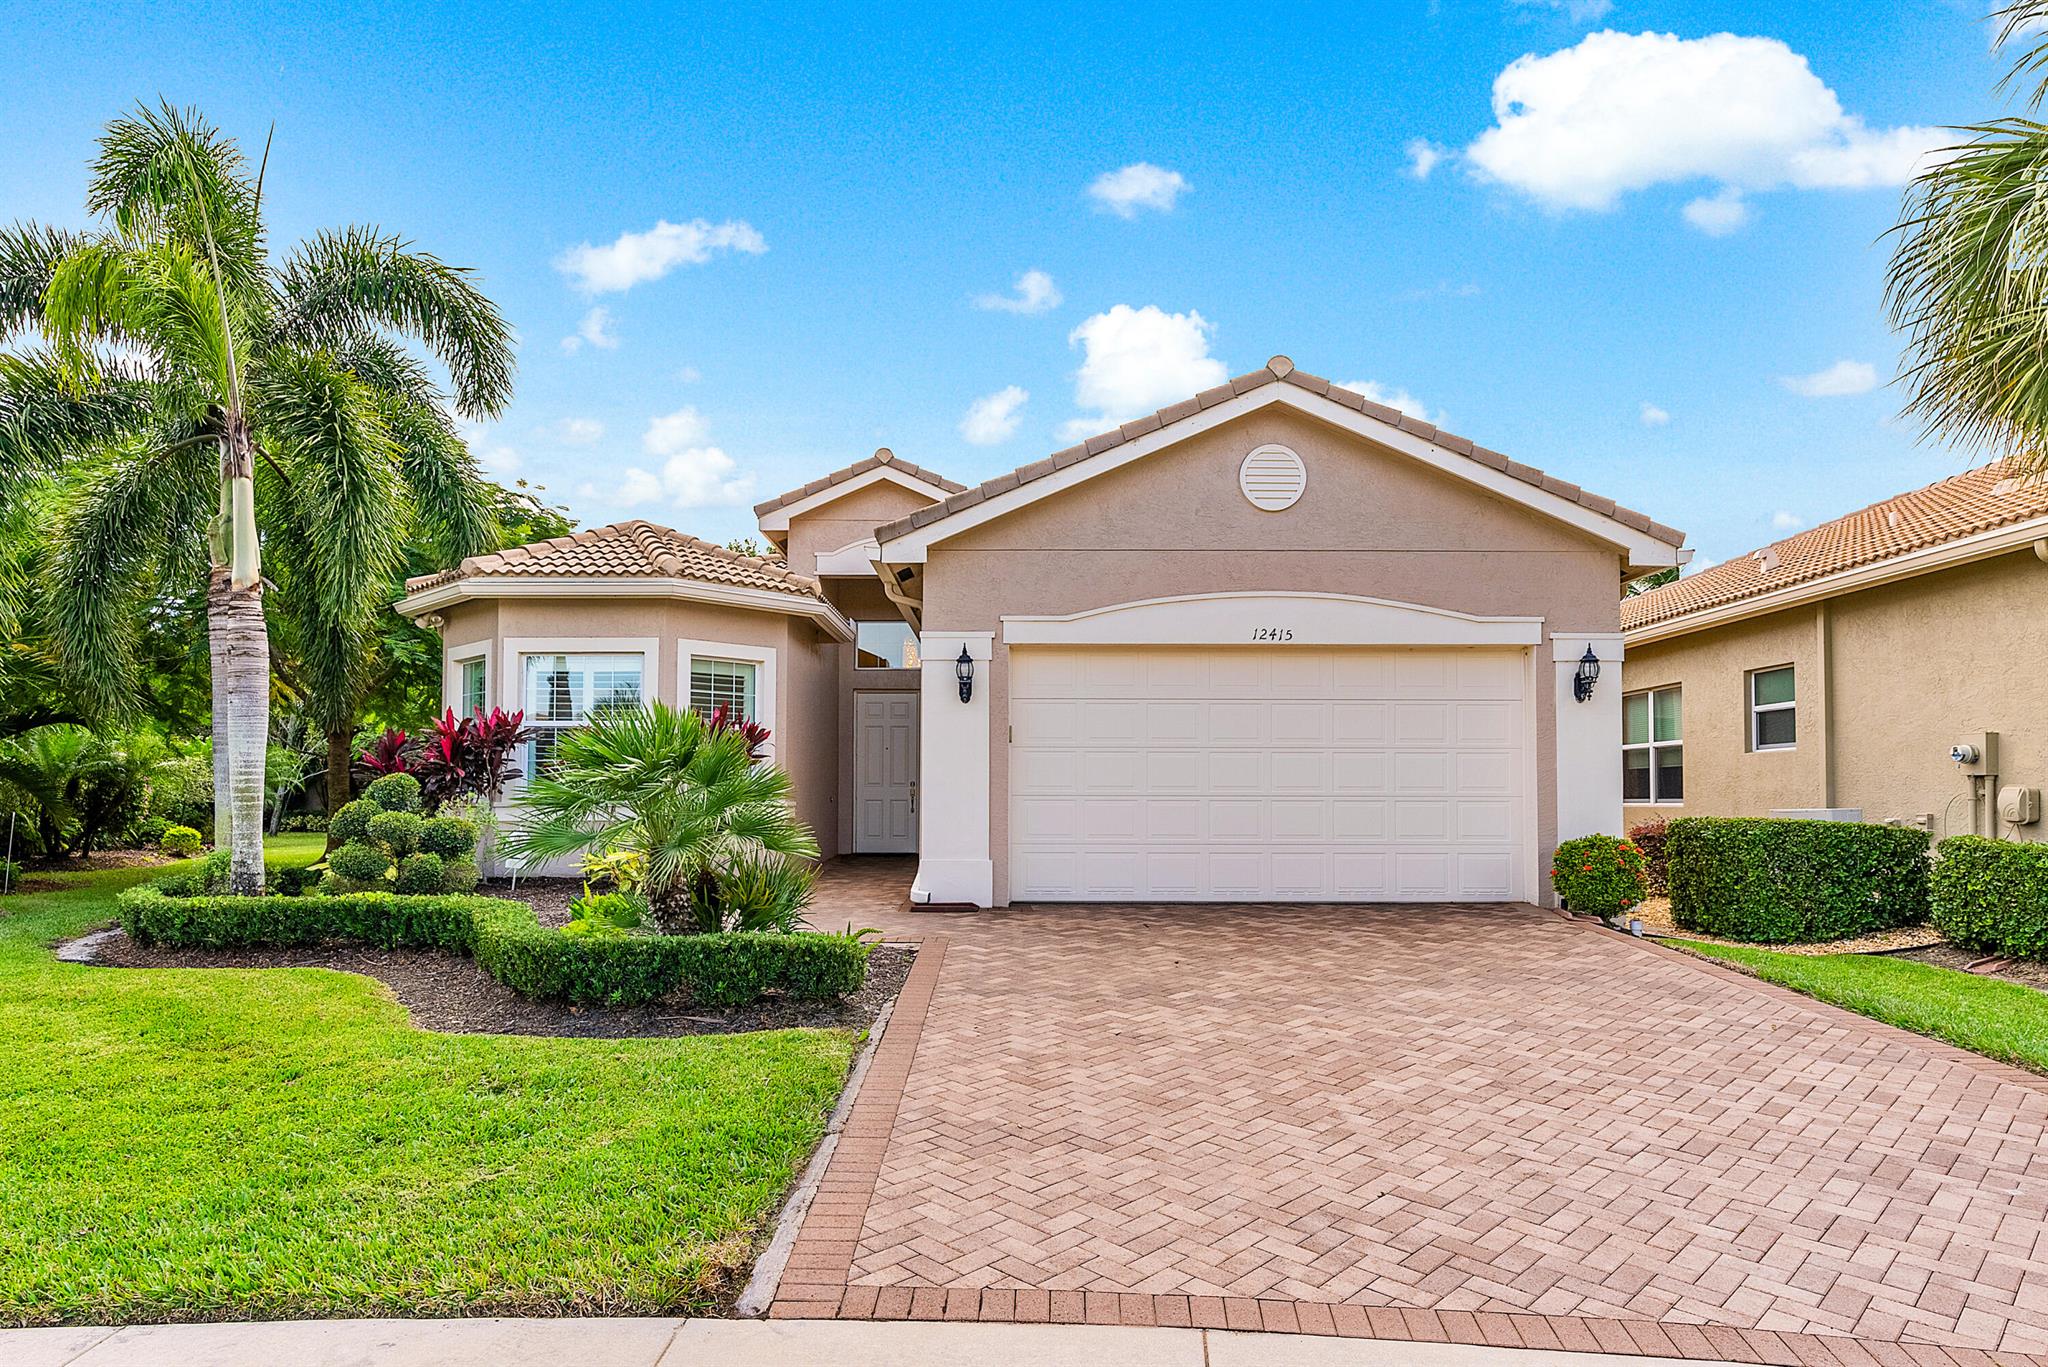 This beautifully appointed Bimini model has a popular open floor plan.The 3/3+den sits in a cul-de-sac on a lushly landscaped,private,oversized (almost 1/3 acre) pie-shaped home site.Features include impact windows,new a/c unit,central vac,designer window treatments,plantation shutters,magnificent light fixtures,fans,hi-hats and upgraded baths!Porcelain tile has been installed on the diagonal in the main living areas.The gourmet kitchen has wood cabinets,granite countertops,glass tile backsplash,snack bar with pendant lights,breakfast area and much more!The double oven has convection cooking.The kitchen is open to the dining room and to the great room with built-in entertainment center.Large master suite with luxurious bath.You'll love the L-Shaped covered patio and large private lot.